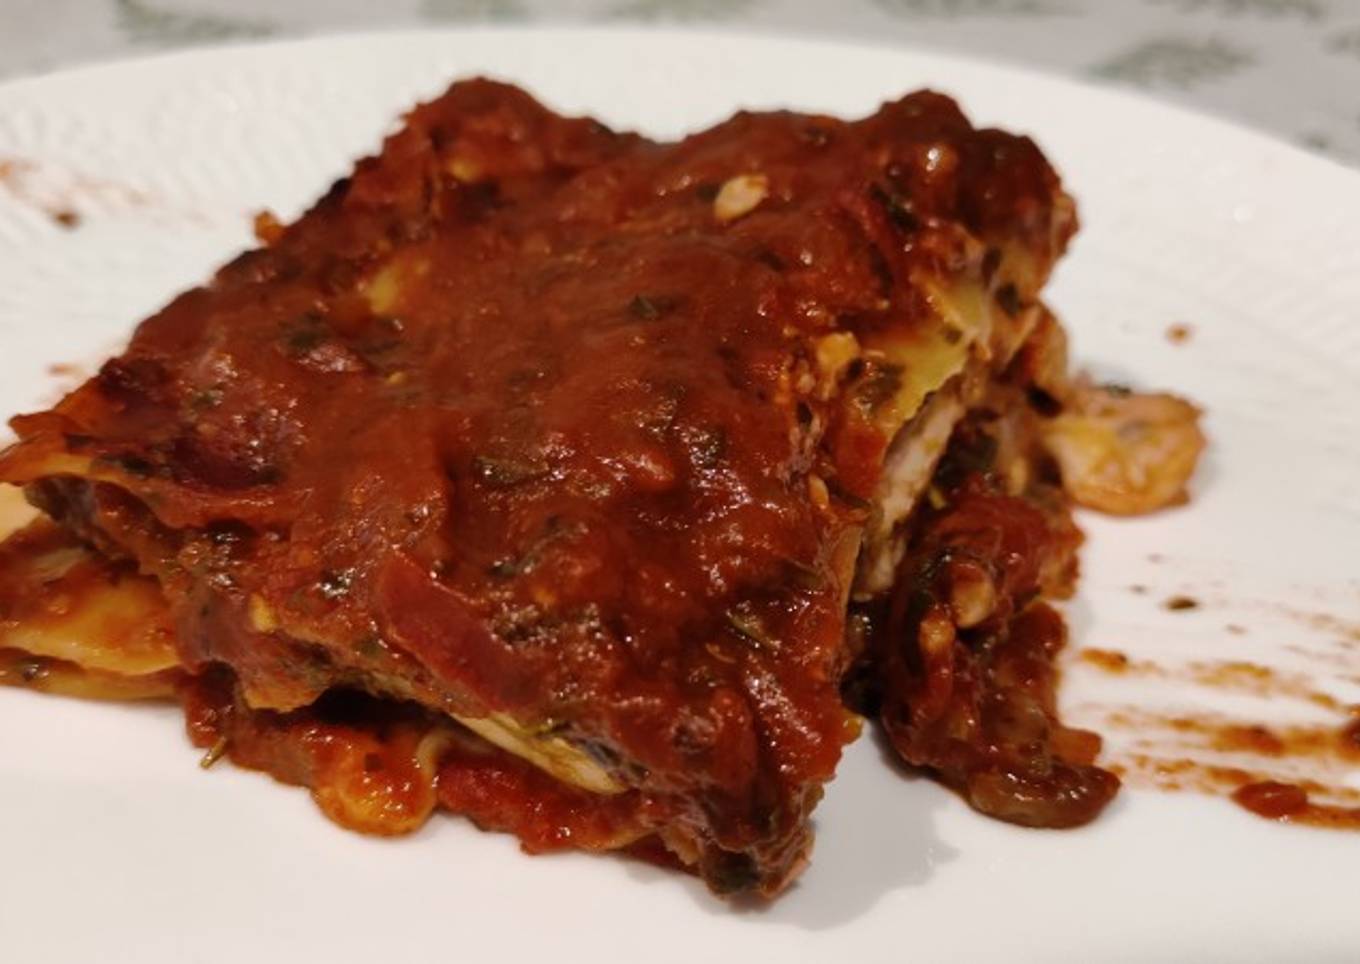 Basic Adapted Lasagne Bolognese